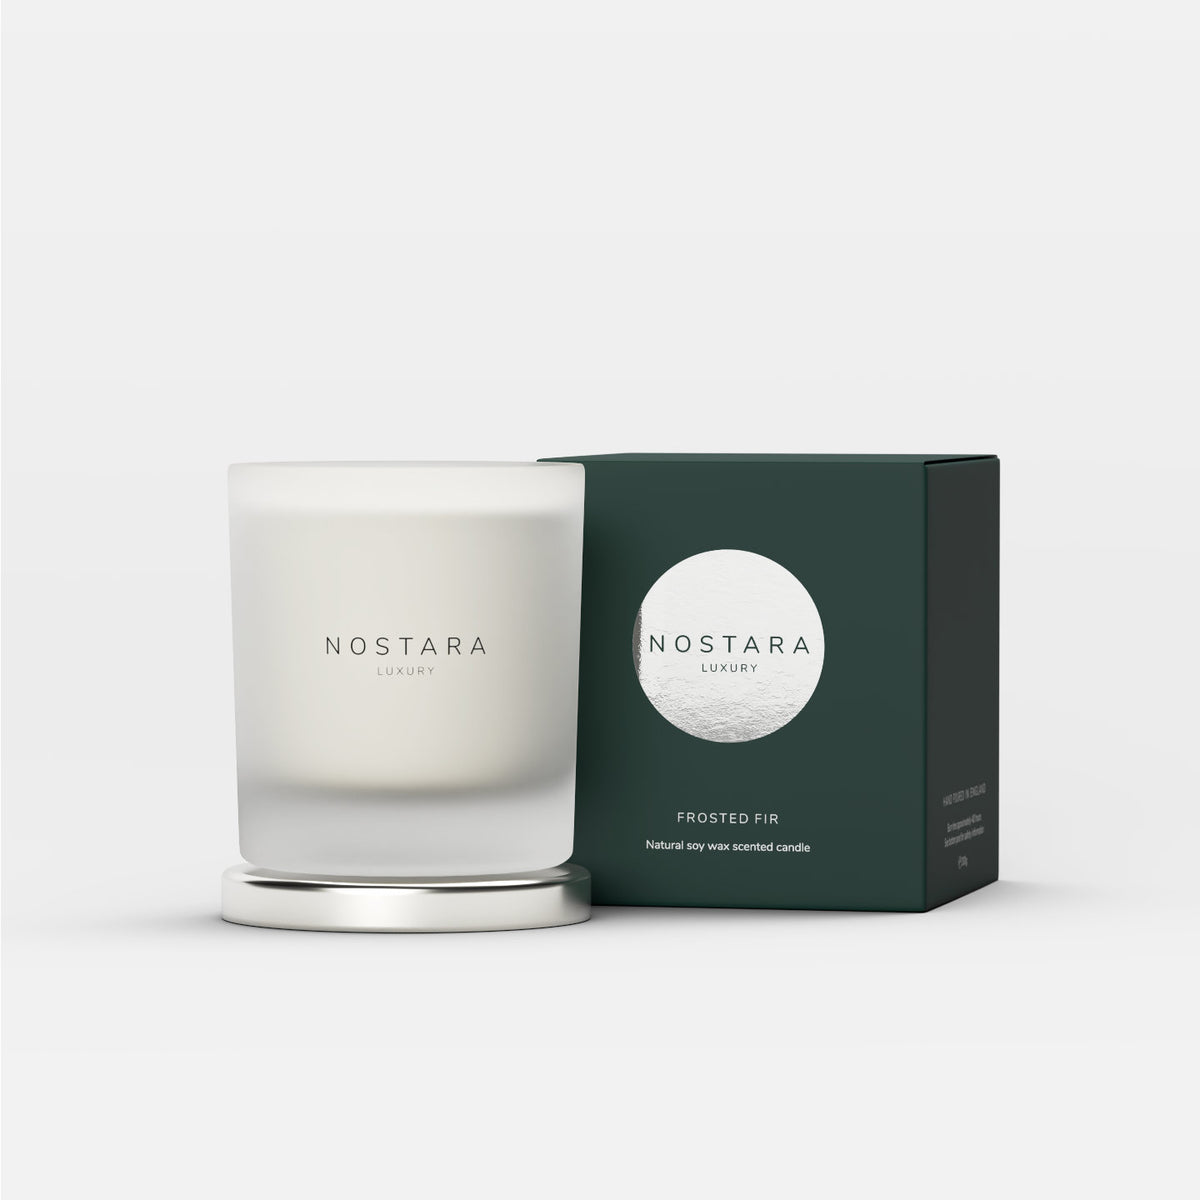 Nostara Frosted Fir Scented Candle &amp; Box Image 